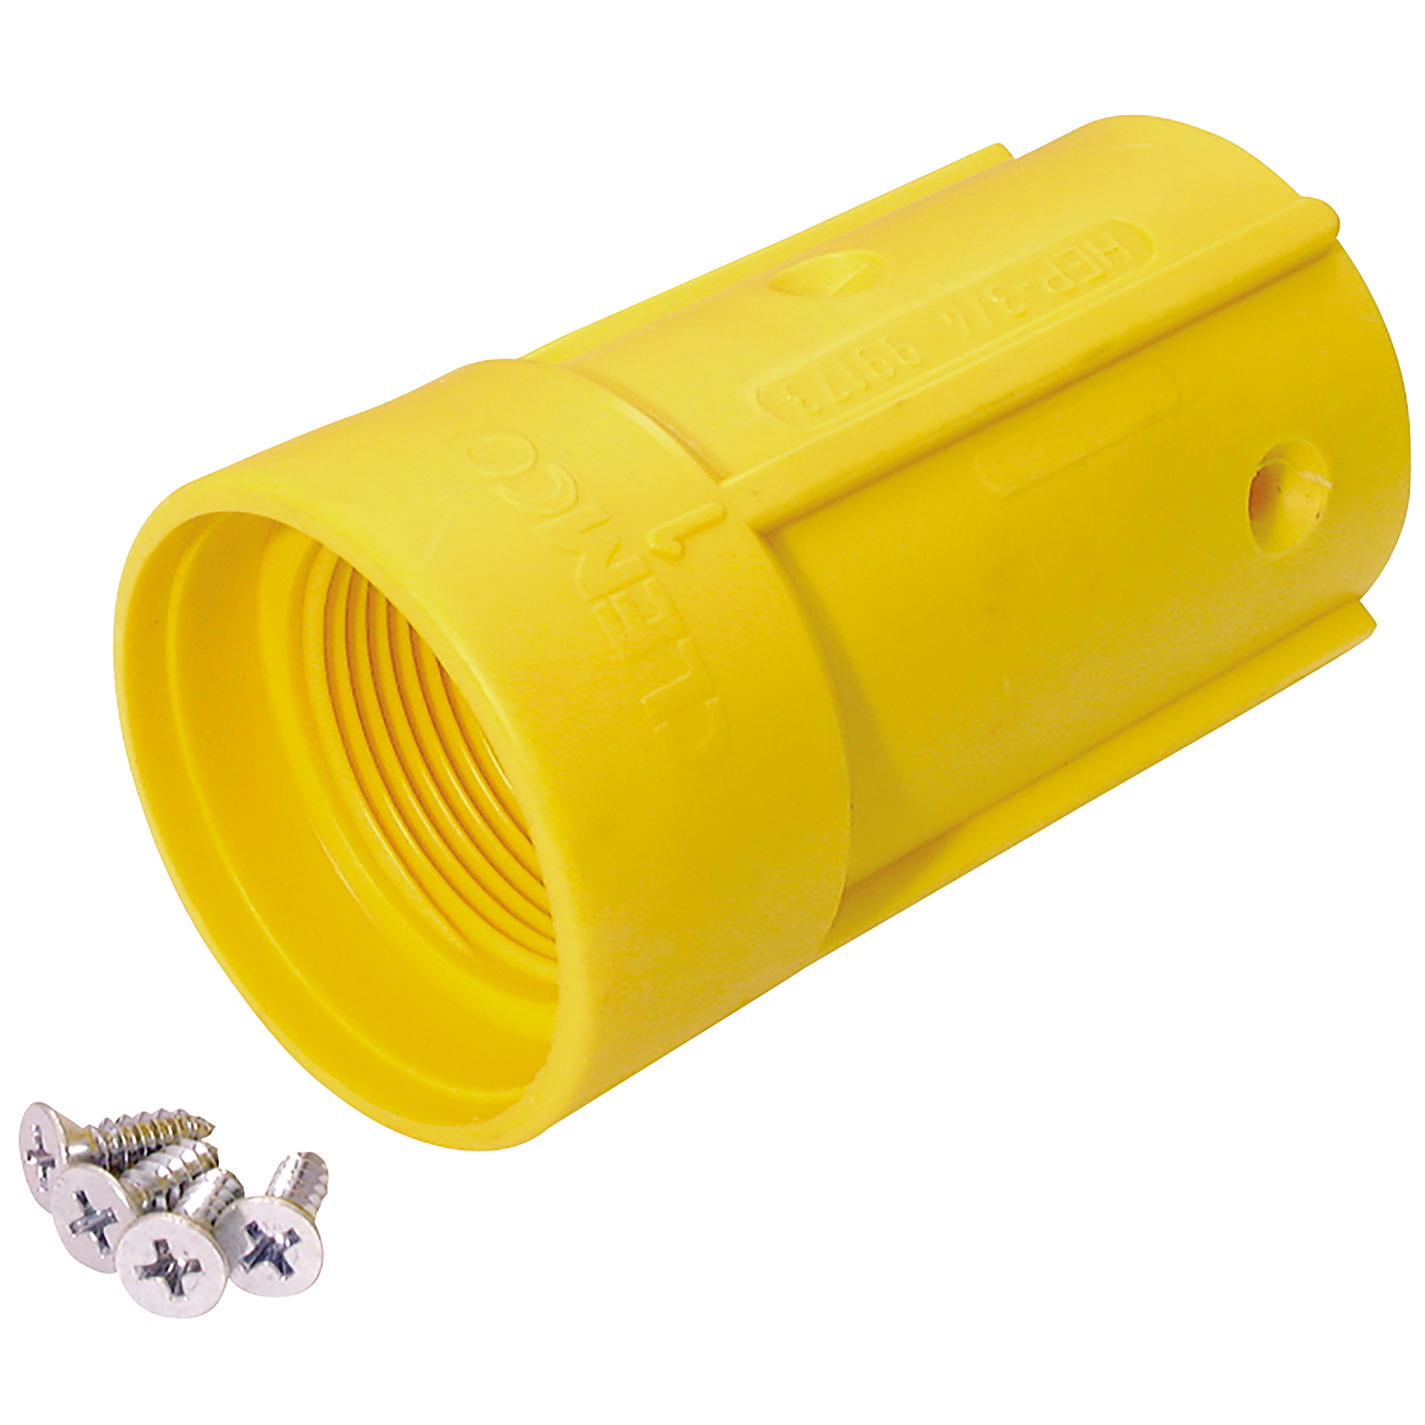 NY NOZZLE HOLDER FOR 25X7MM HOSE G11/4"